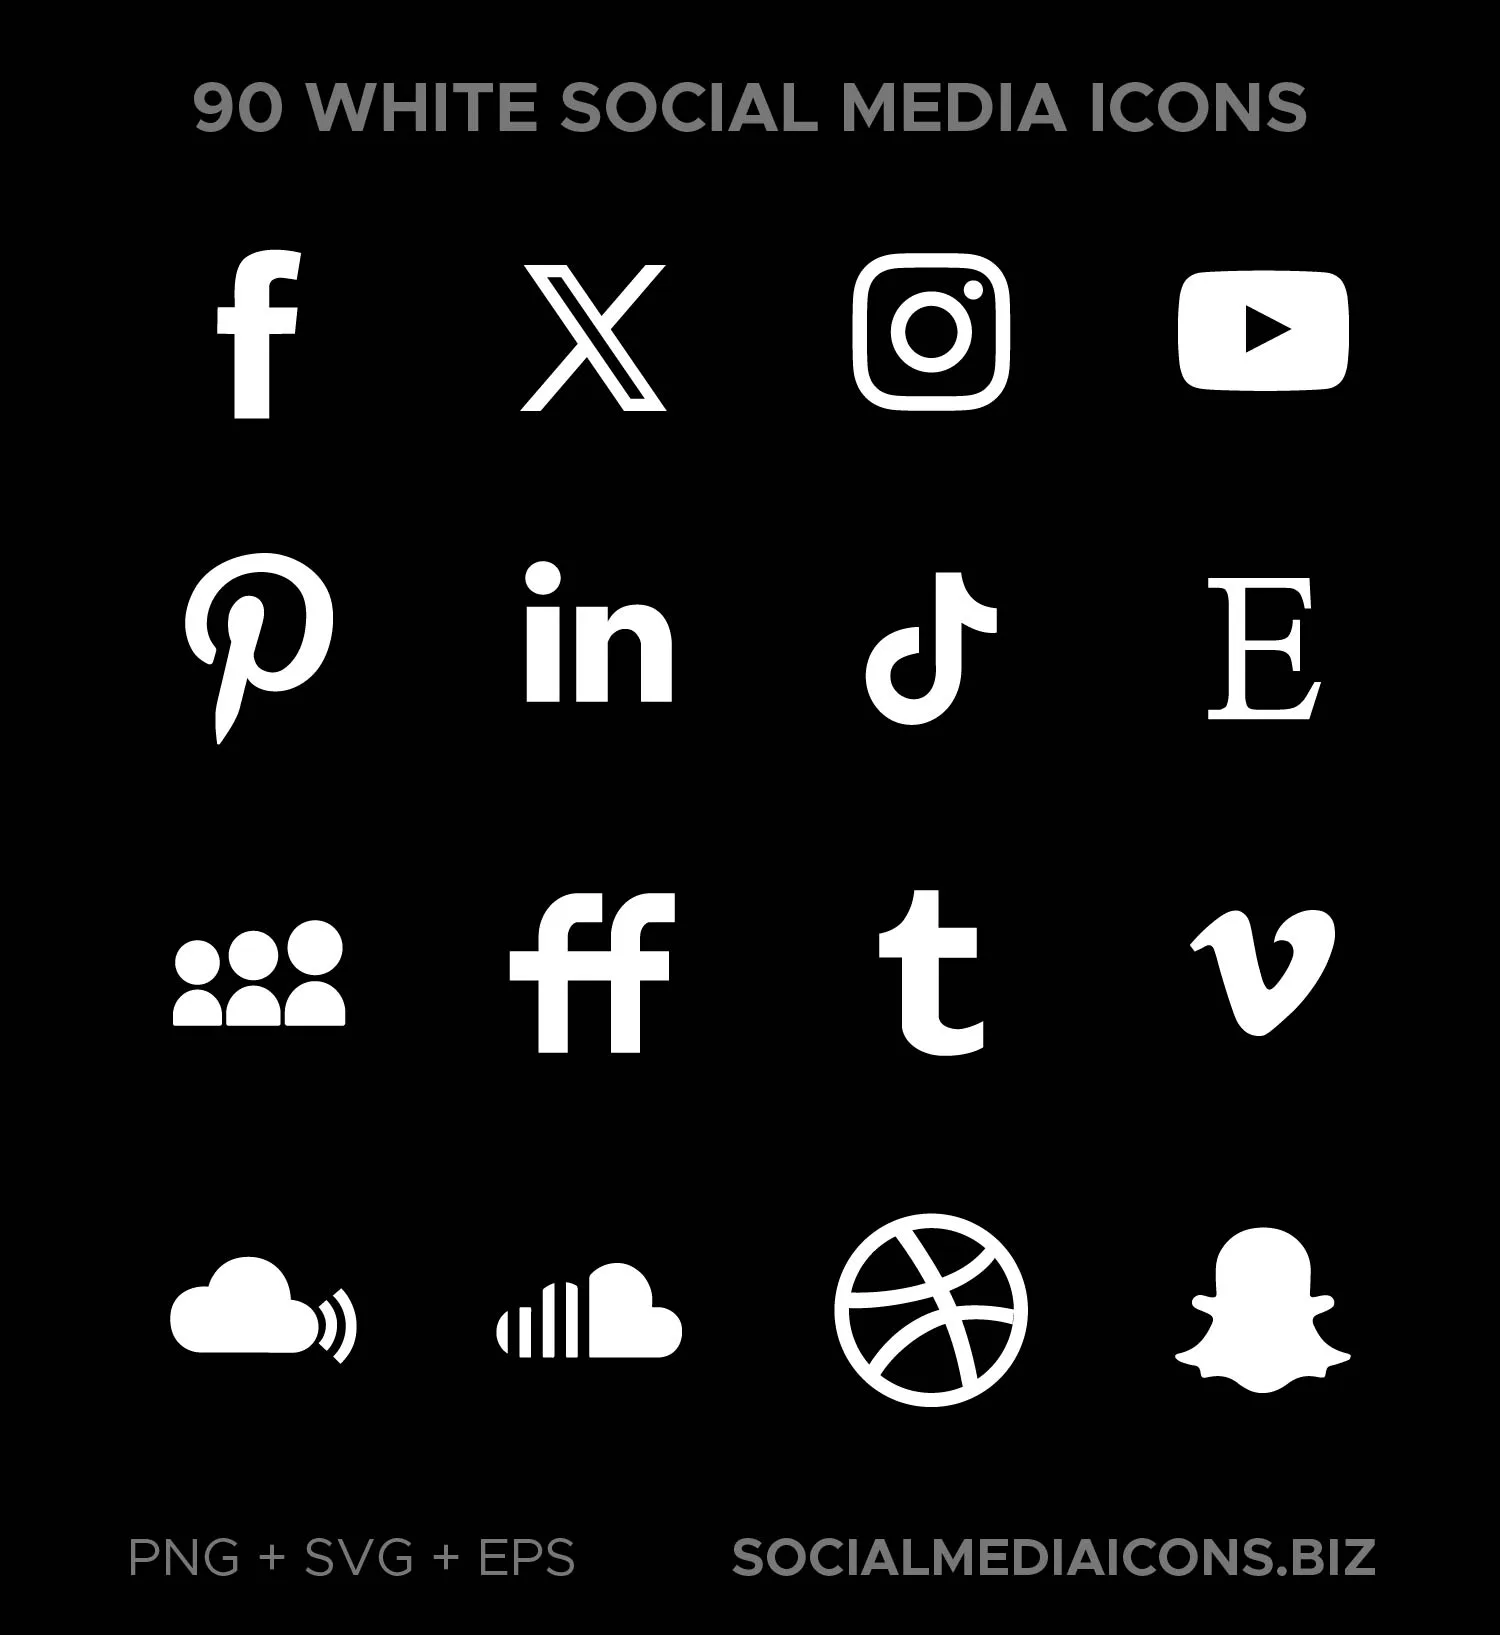 Simple white social media icon set - PNG + SVG + Vector Eps - 90 icons